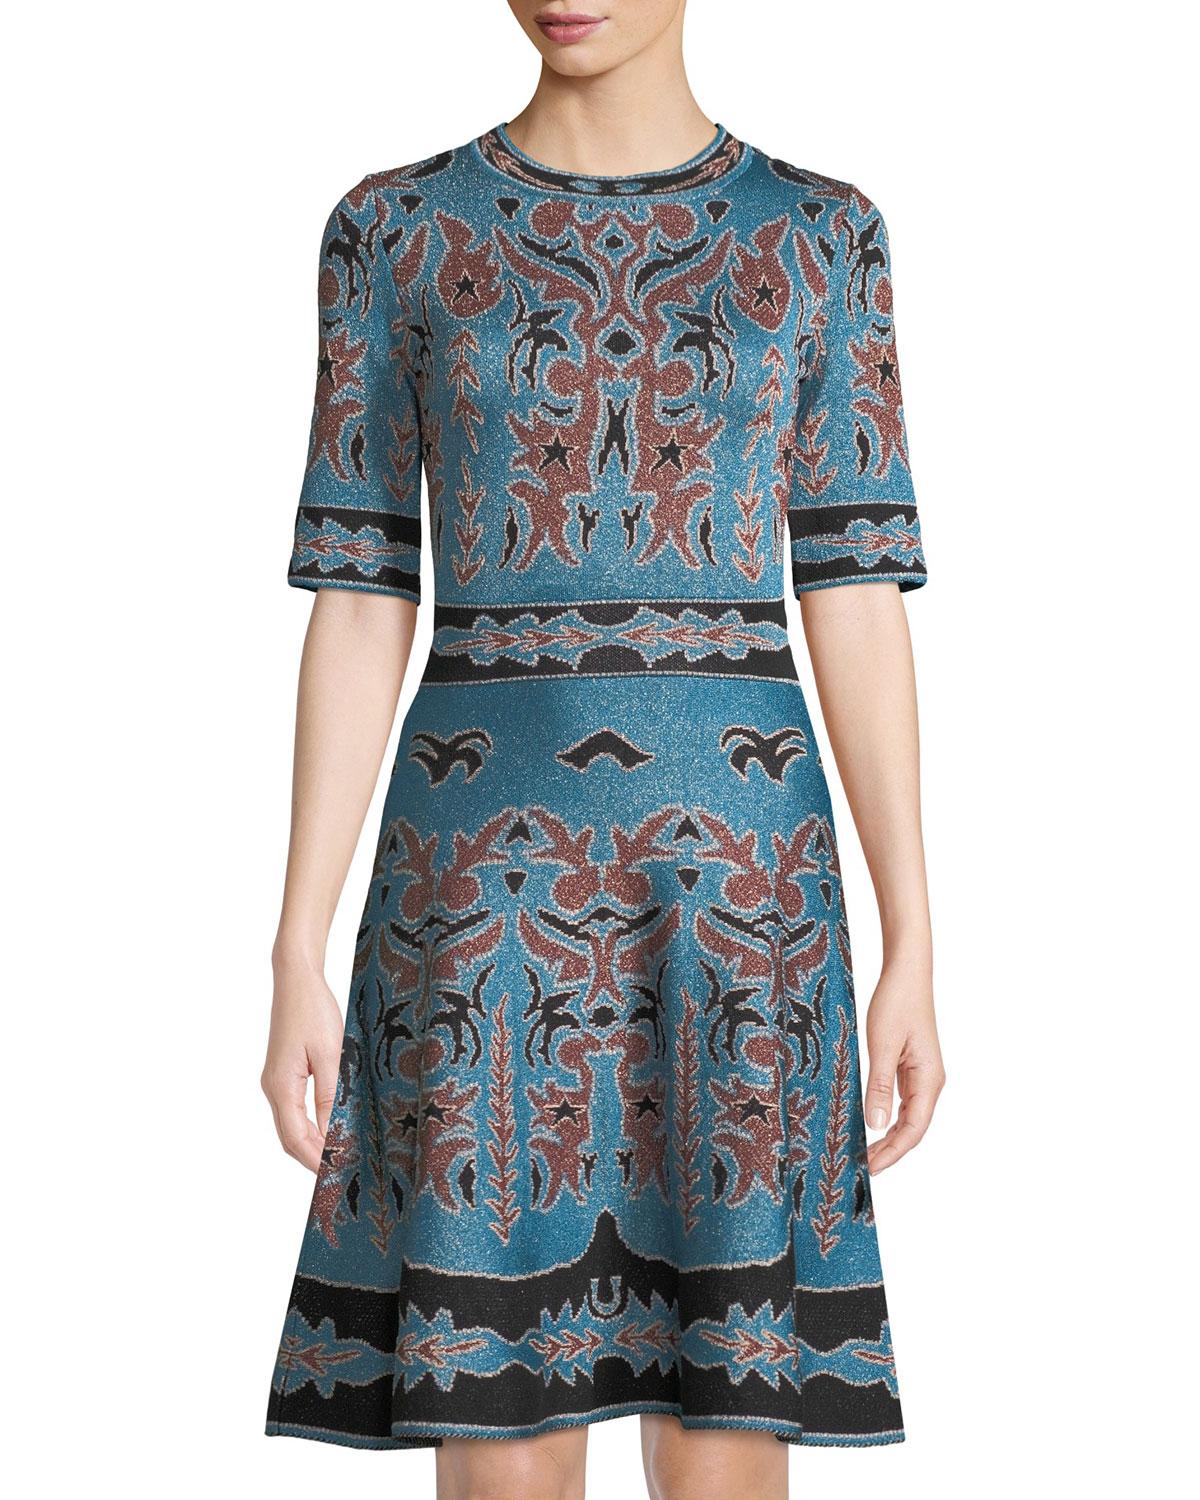 Lyst - M Missoni 1/2-sleeve Shimmer Intarsia Fit & Flare Dress in Blue